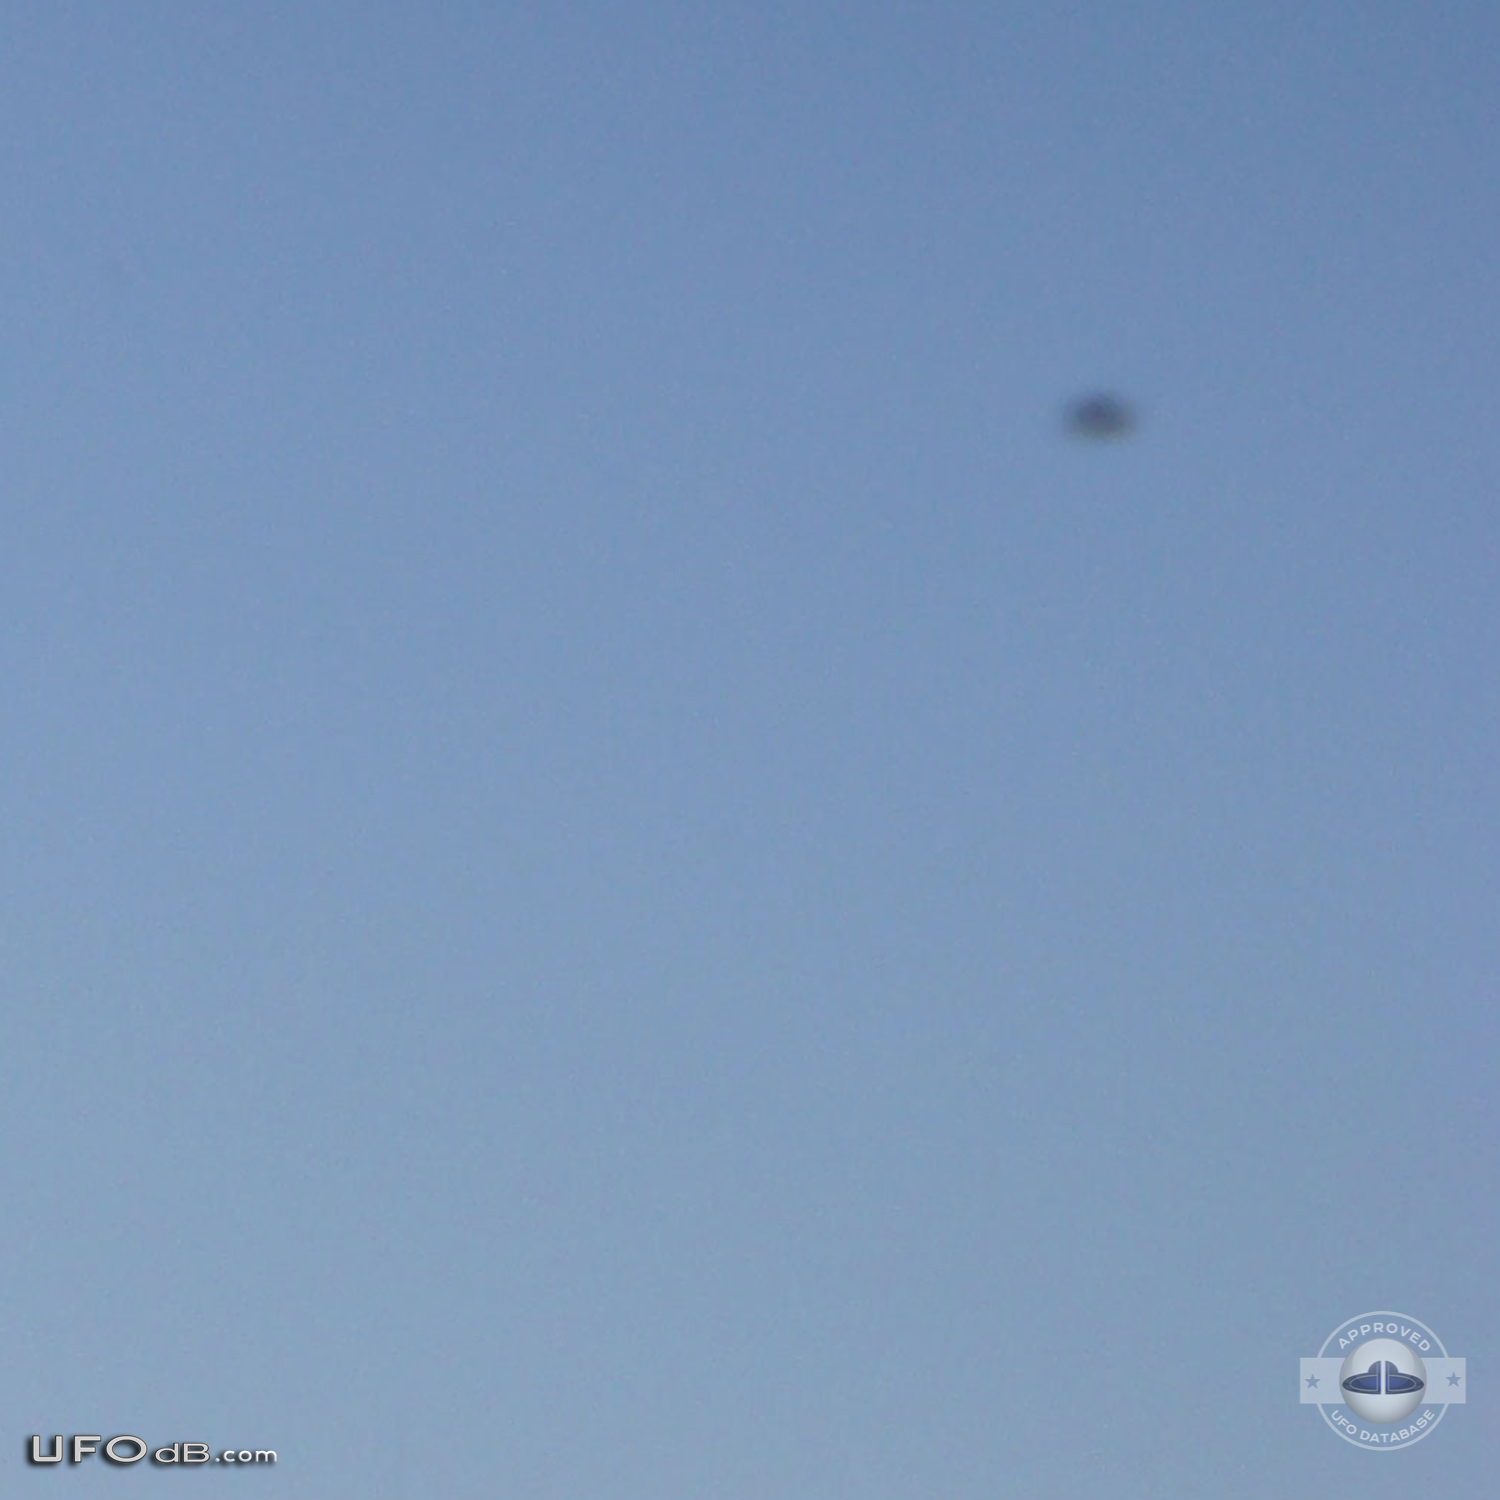 Two ufo pictures taken in the high mountains - Puerto Rico - July 2011 UFO Picture #376-2